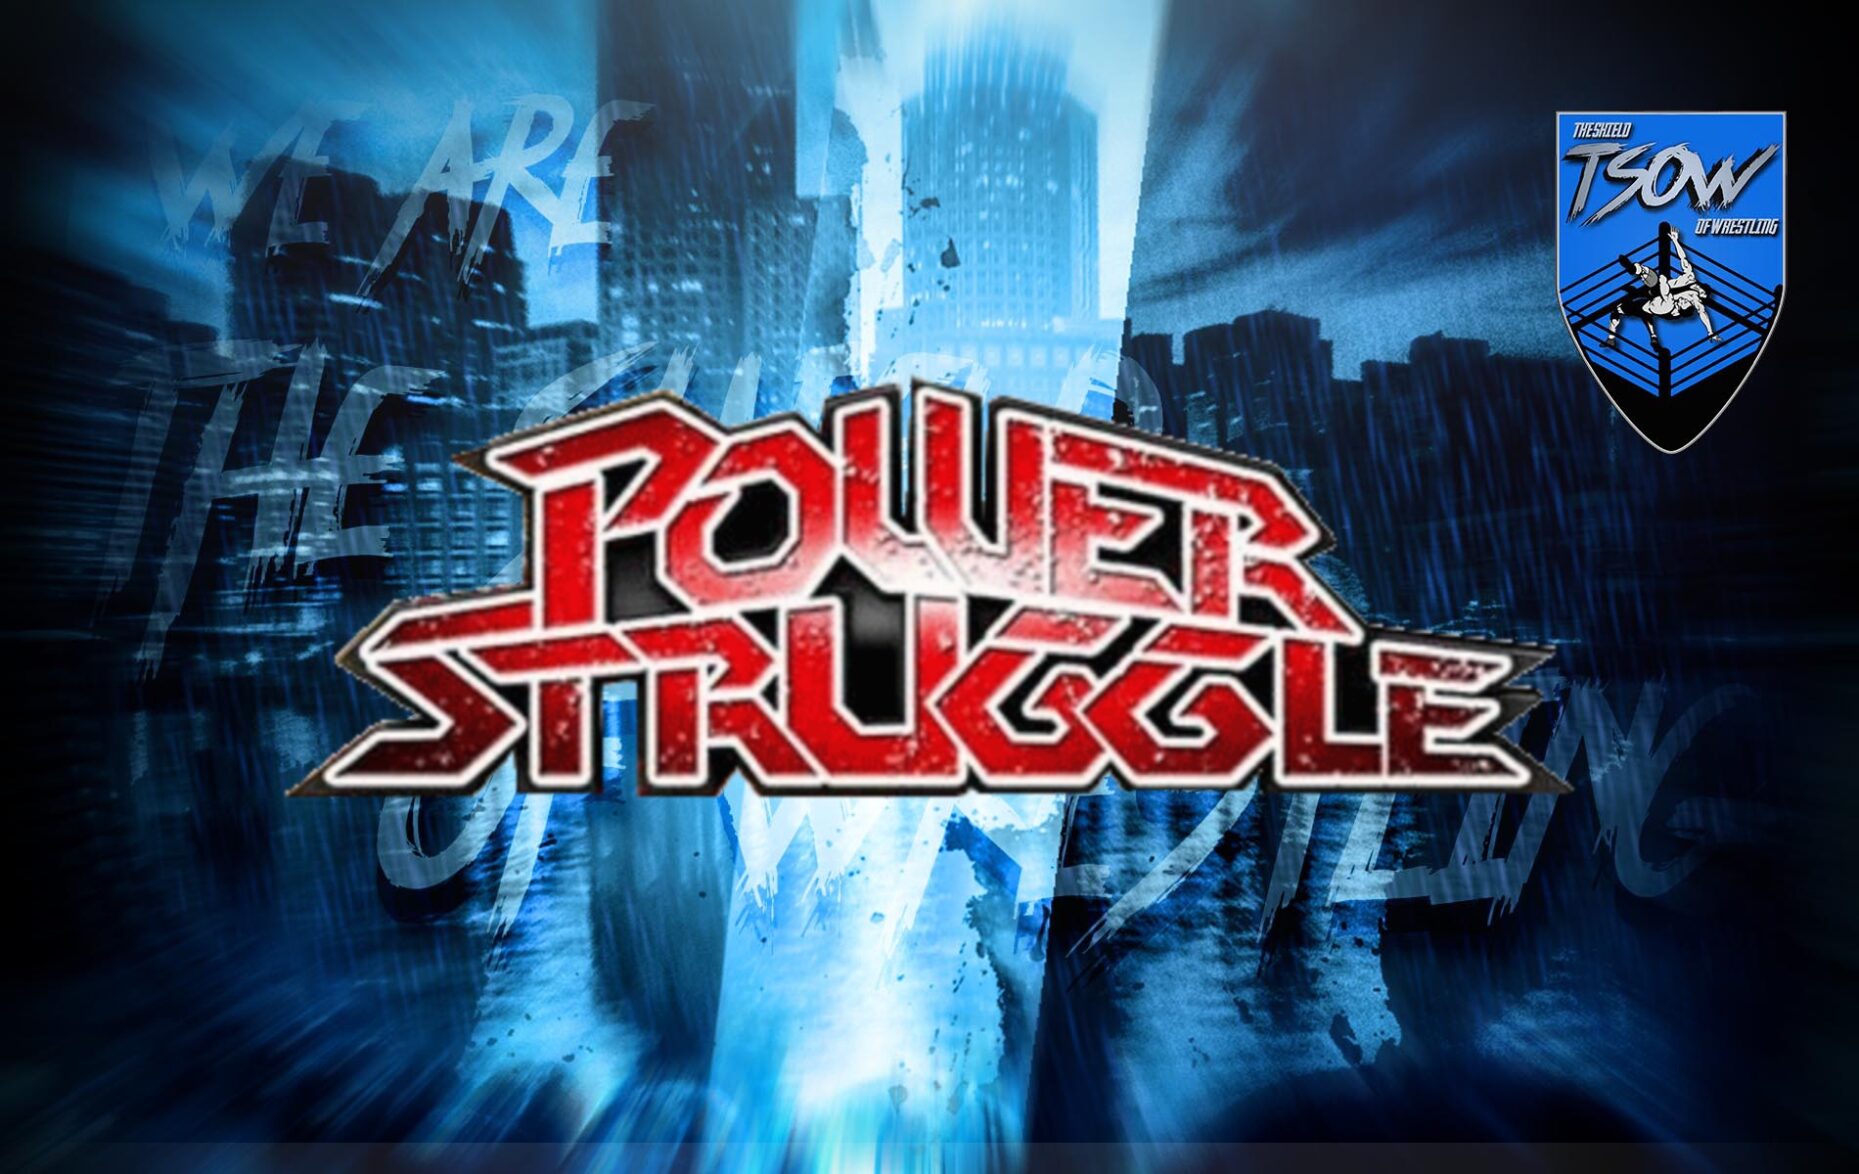 NJPW Road To Power Struggle 2020 Day 3 The Shield Of Wrestling